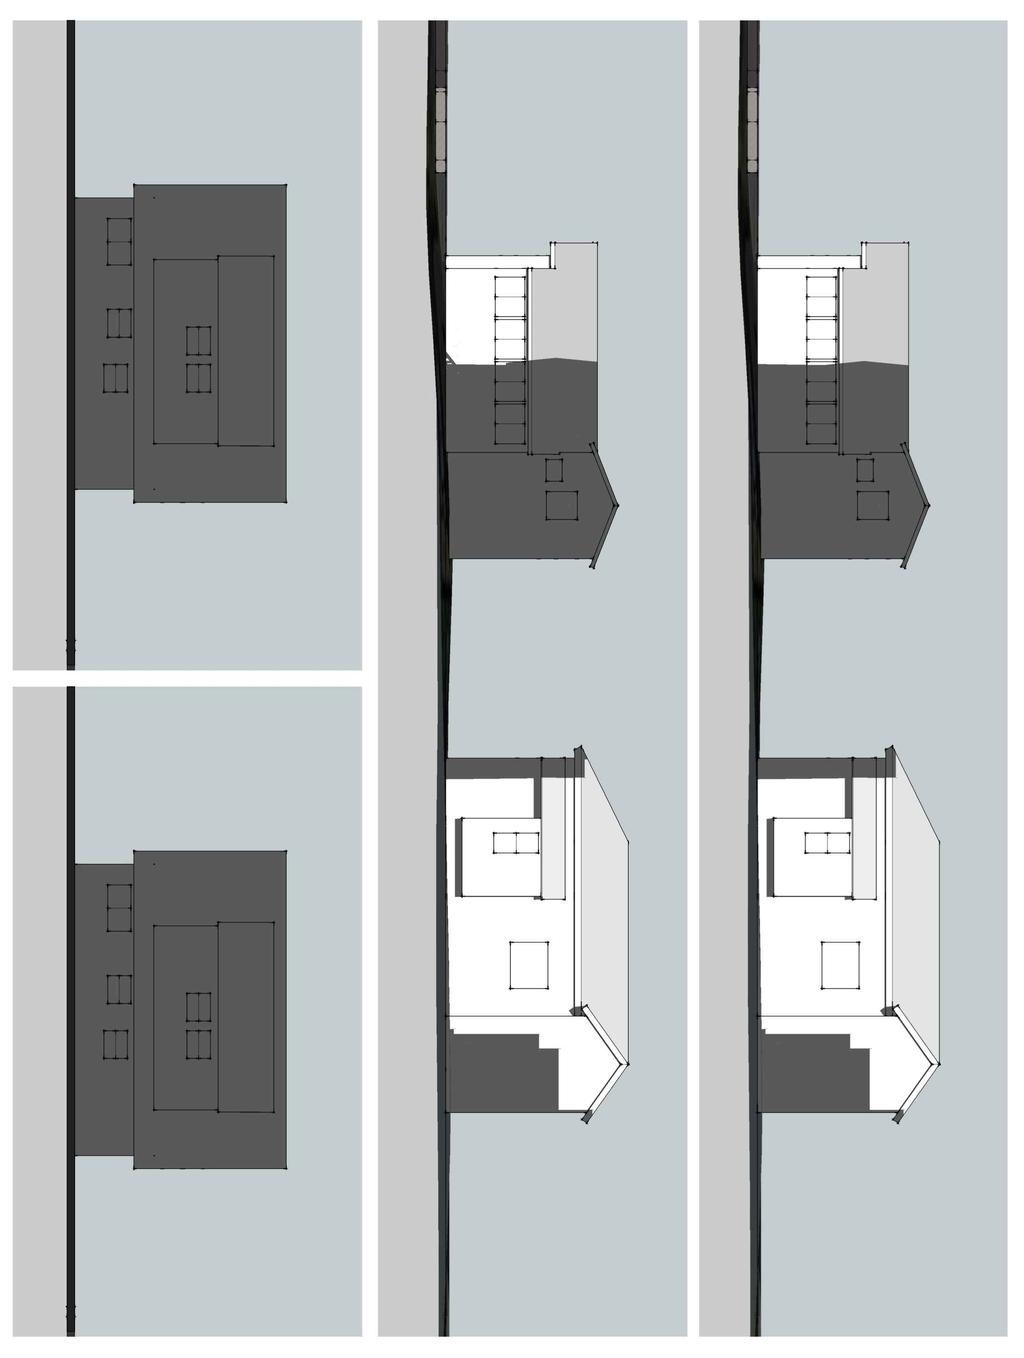 COPYRIGHT - 05 STUDIO ARCHITECTURE. ALL RIGHTS RESERVED. NO PART OF THIS DOCUMENT MAY BE REPRODUCED IN ANY FORM OR BY ANY MEANS WITHOUT PERMISSION FROM STUDIO ARCHITECTURE (SA).